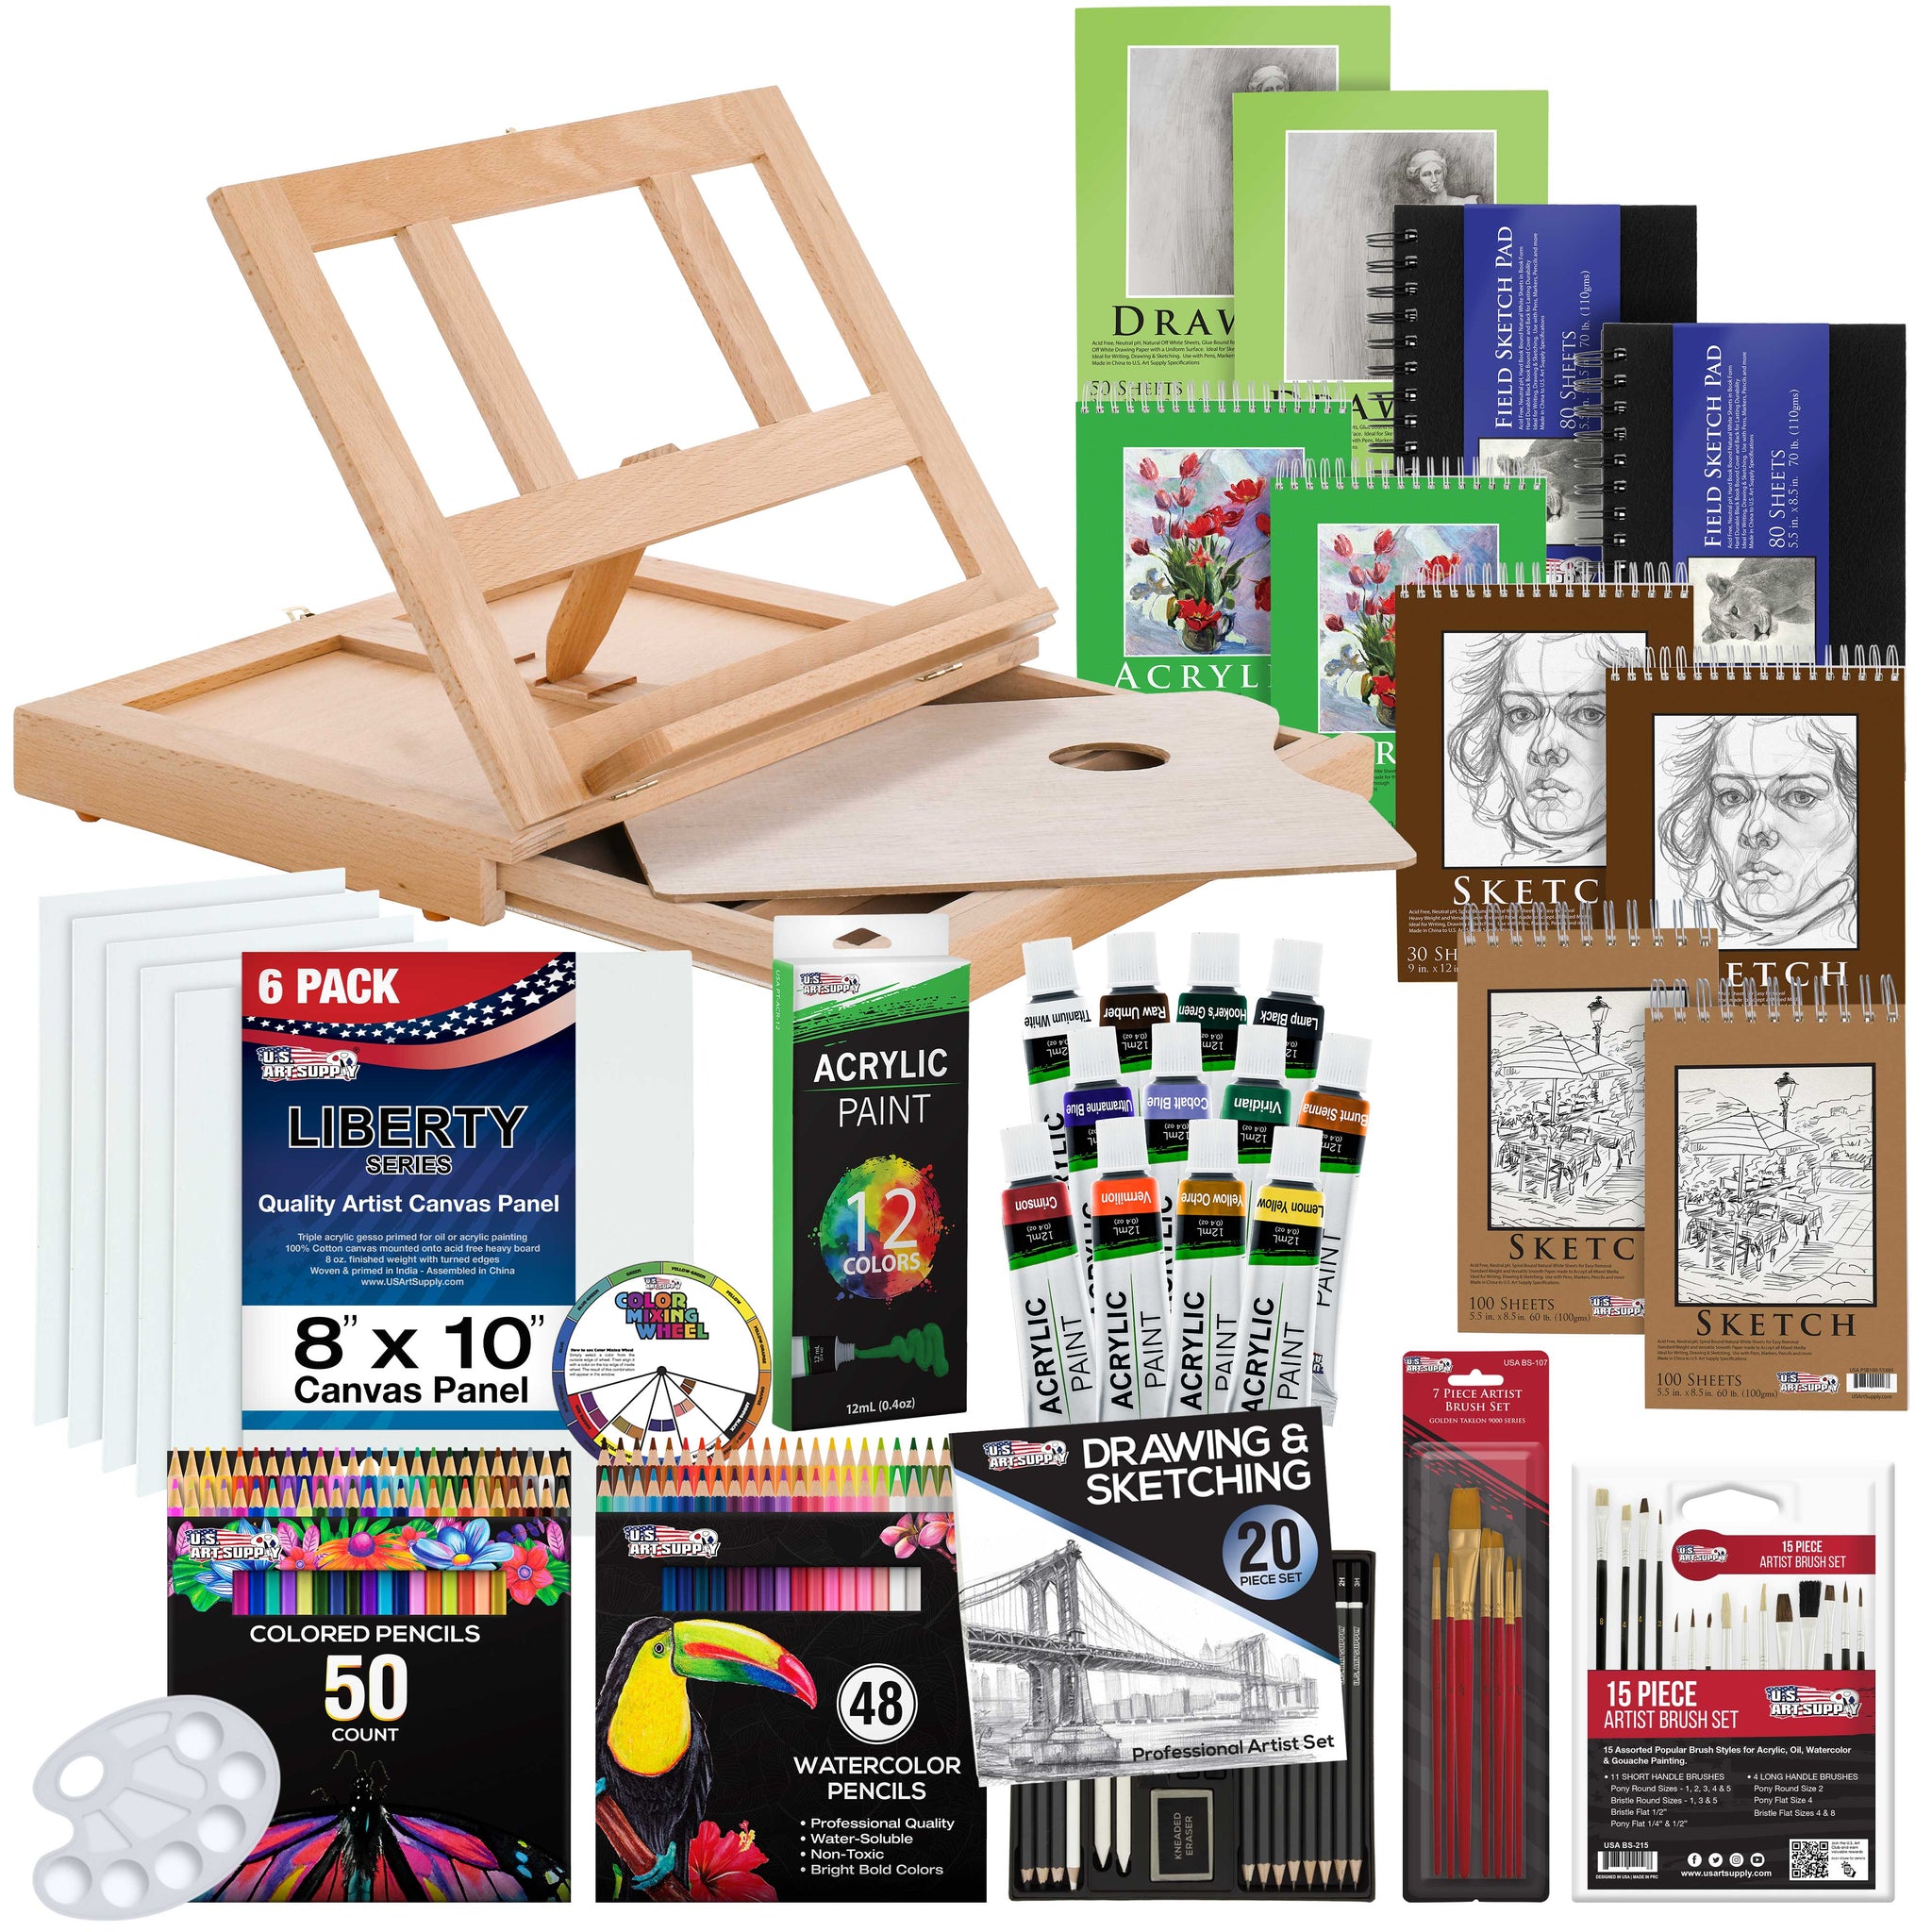 171-Piece Acrylic Painting & Sketch Drawing Set with Wood Easel, Acrylic Paint, 4 Paper Pads, Canvas Panels, Brushes, Color Pencil Set, Sketchbook